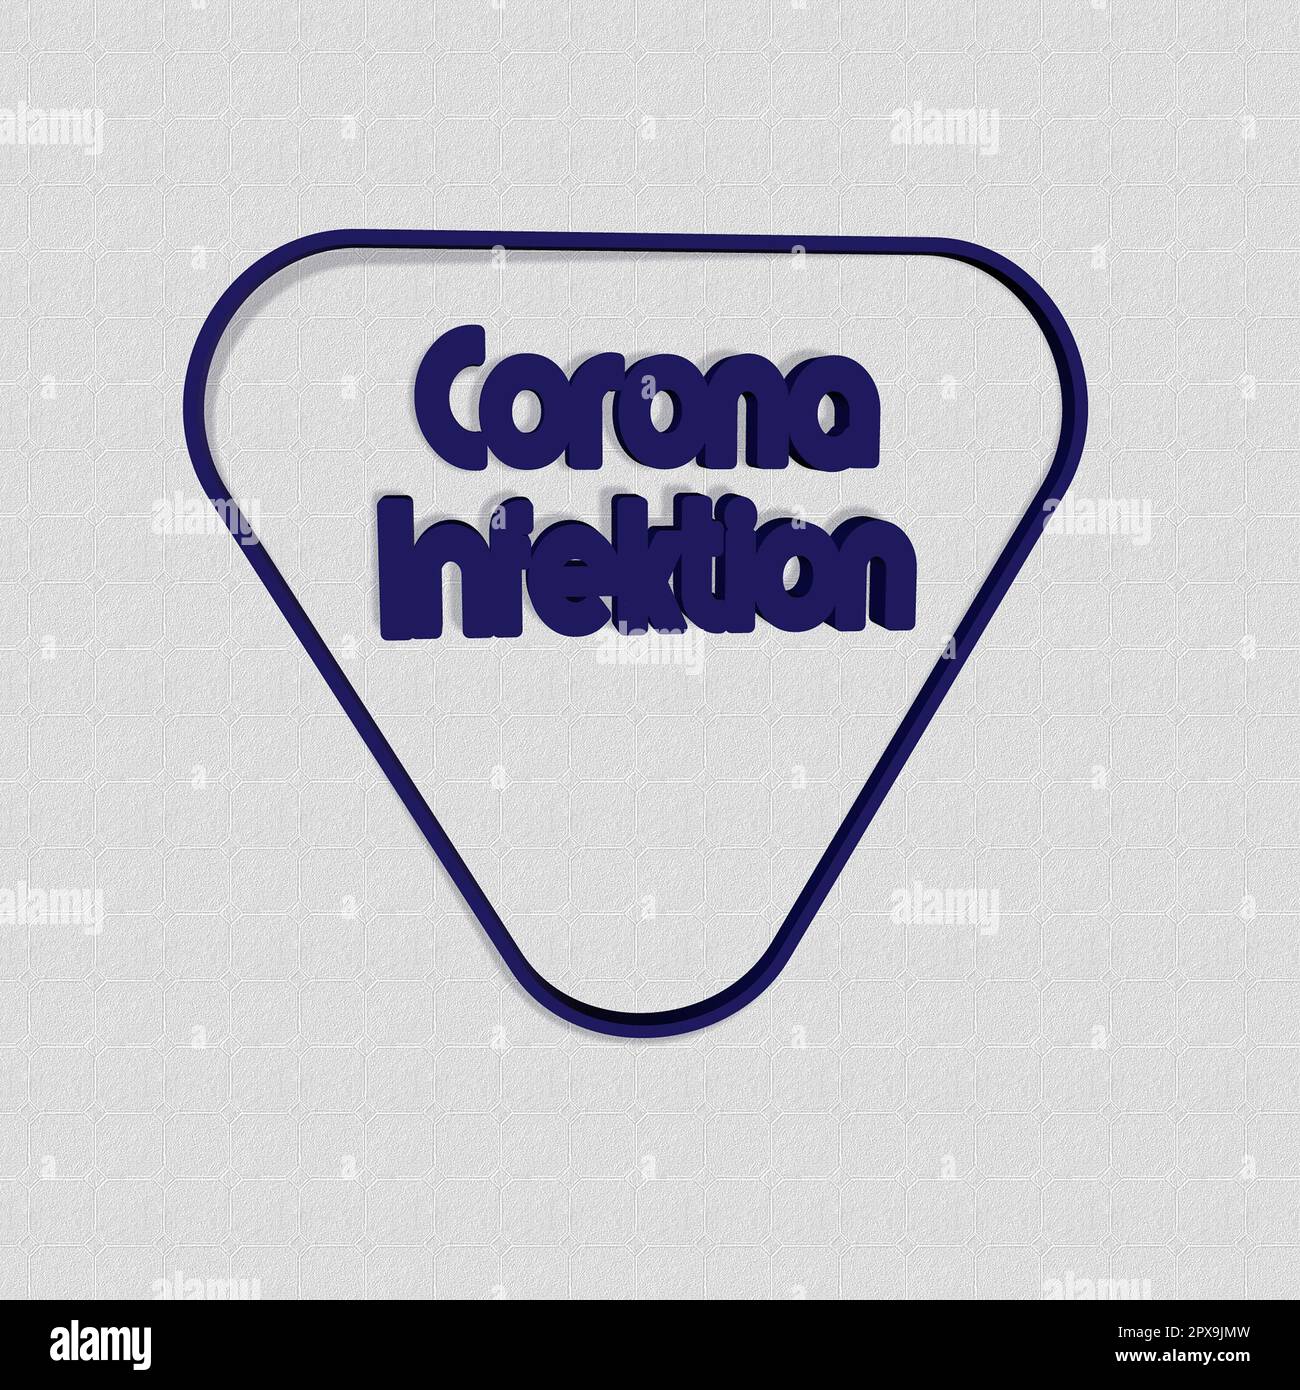 'Coronainfektion' = 'Corona infection' - word, lettering or text as a 3D illustration, 3D rendering, computer graphics Stock Photo